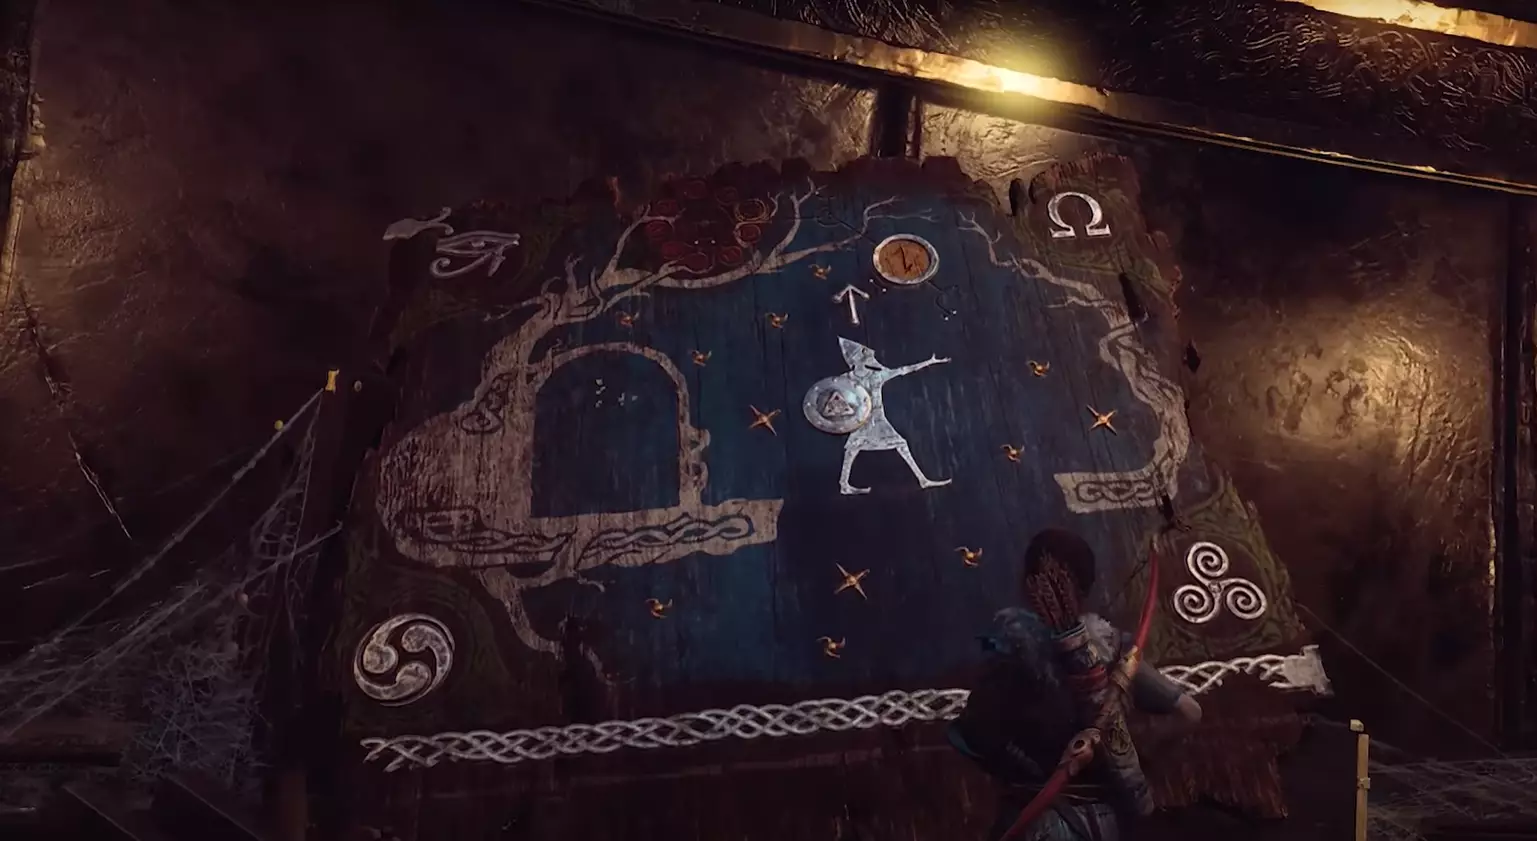 The image showing Tyr travelling magically in 'God Of War' /